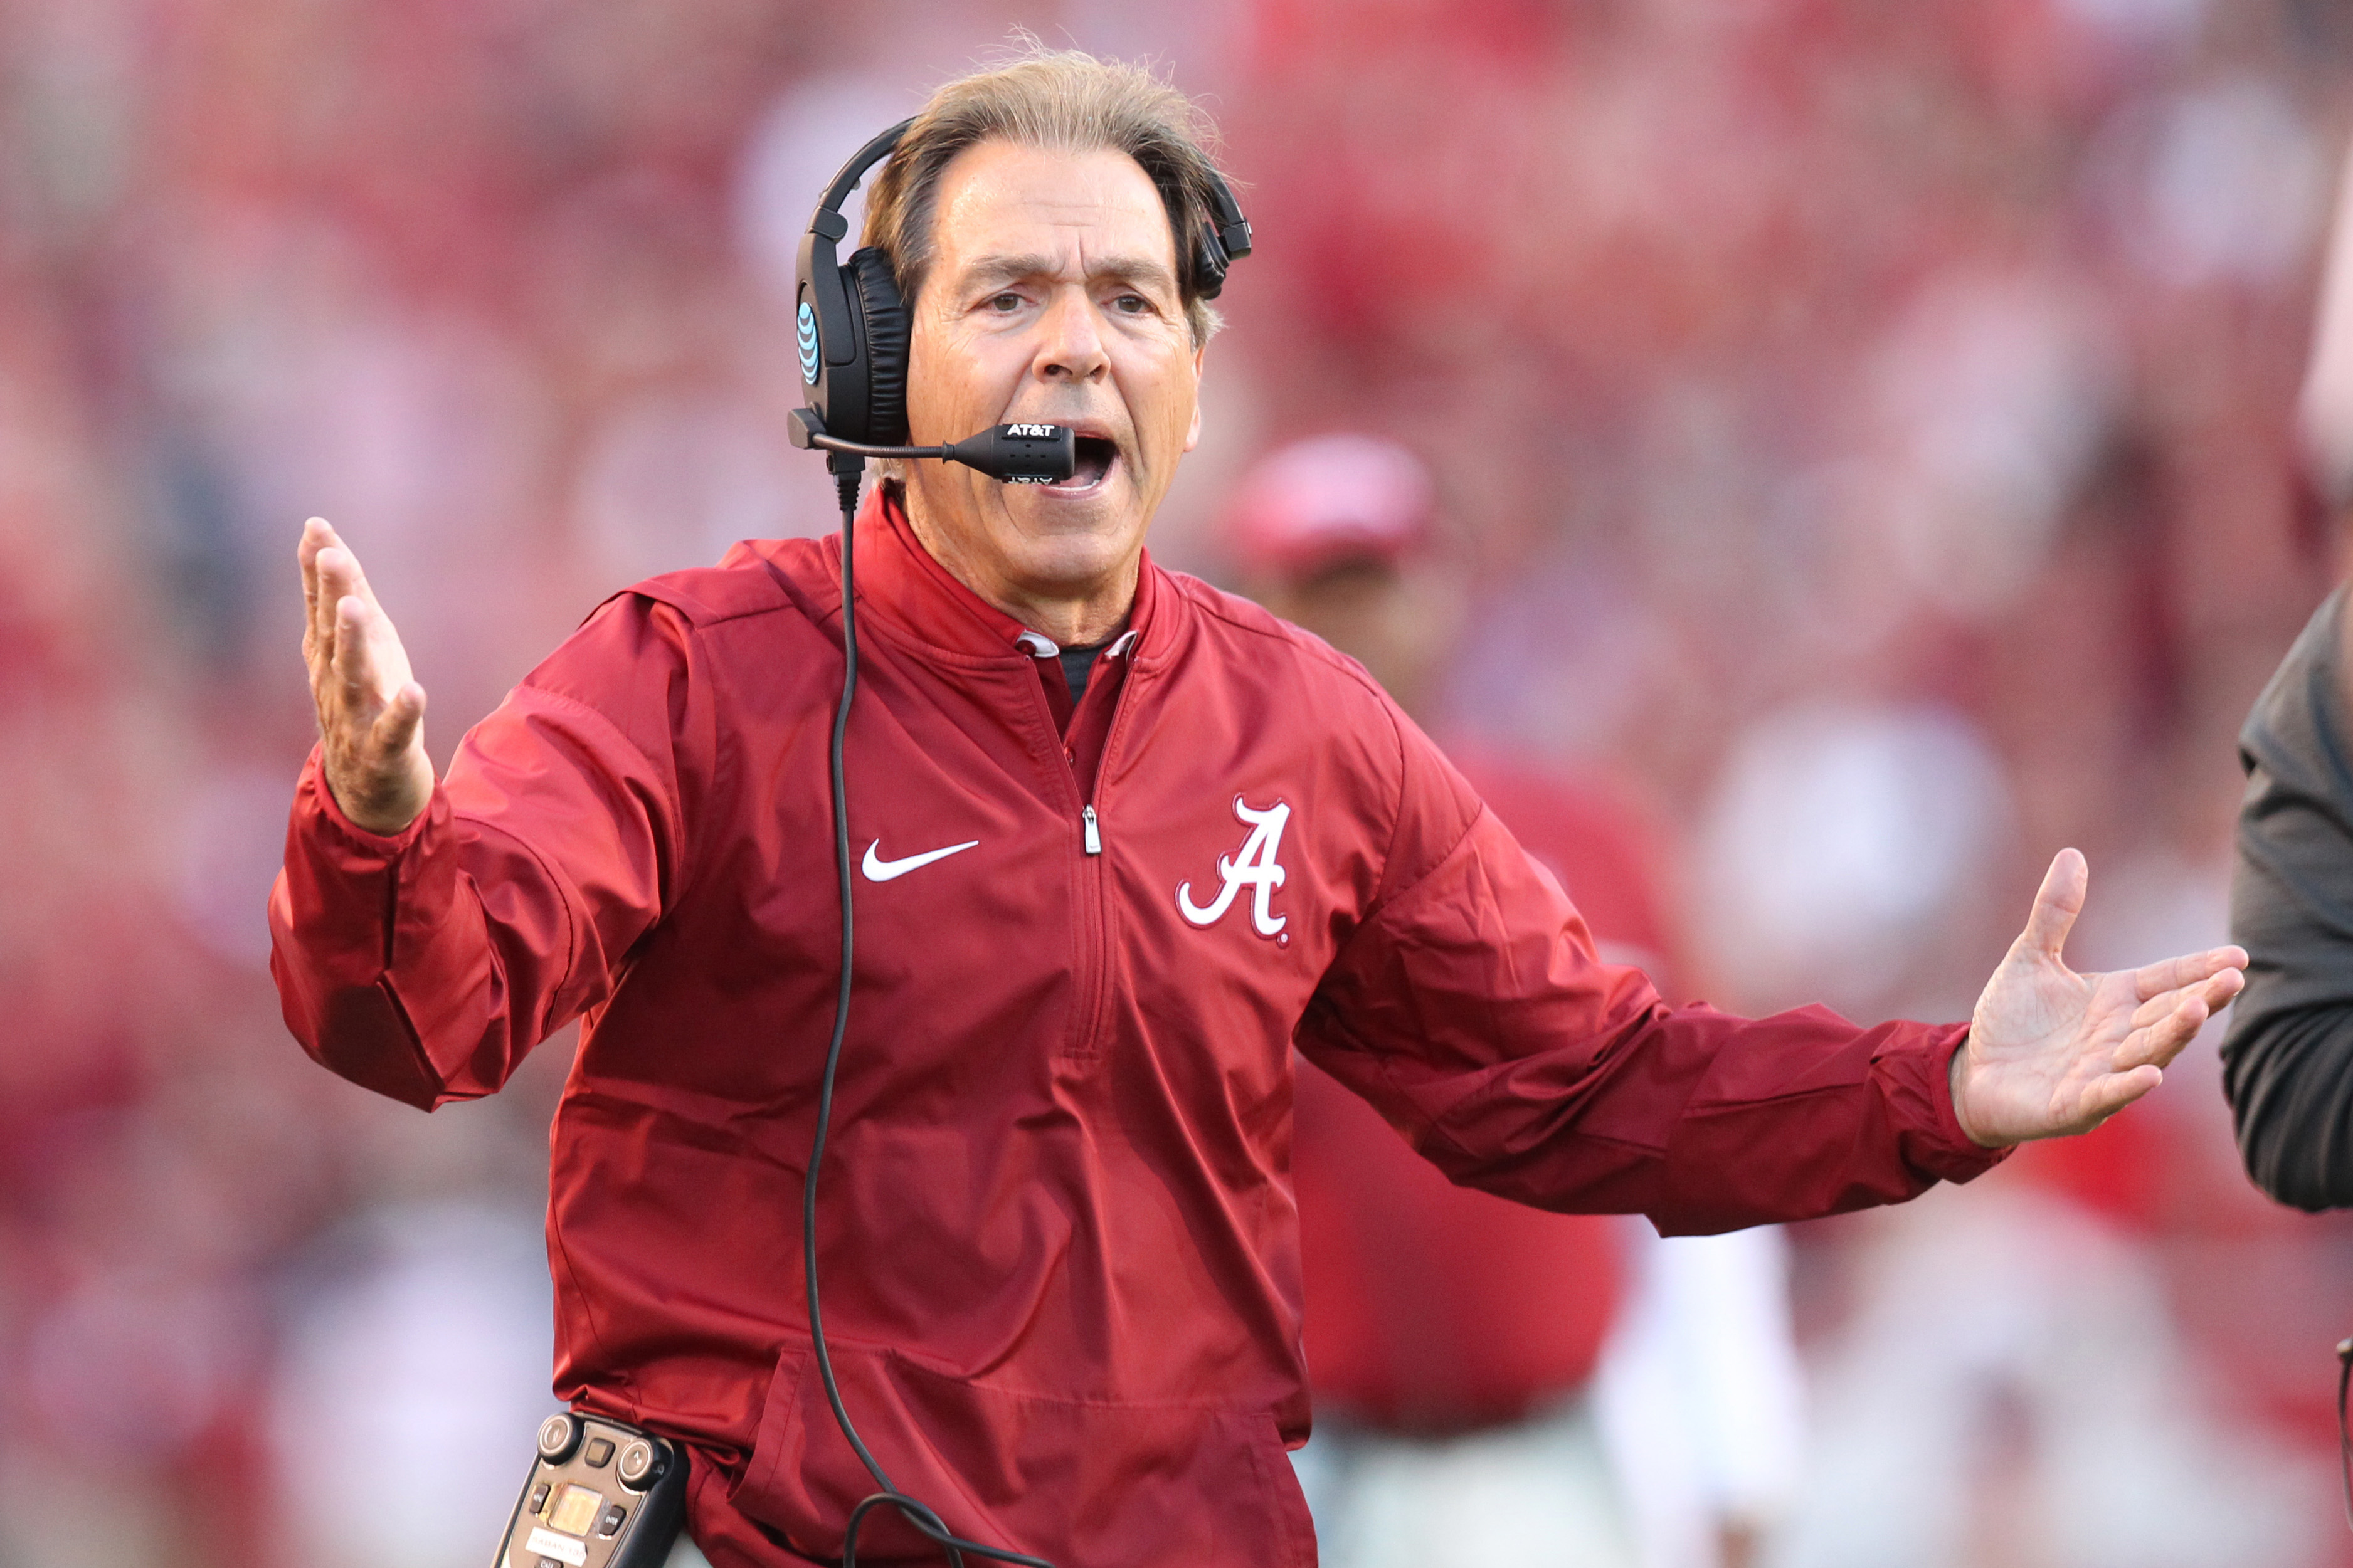 Oct 8, 2016; Fayetteville, AR, USA; Alabama Crimson Tide head coach Nick Saban reacts to a call during the first quarter against the Arkansas Razorbacks at Donald W. Reynolds Razorback Stadium. Mandatory Credit: Nelson Chenault-USA TODAY Sports